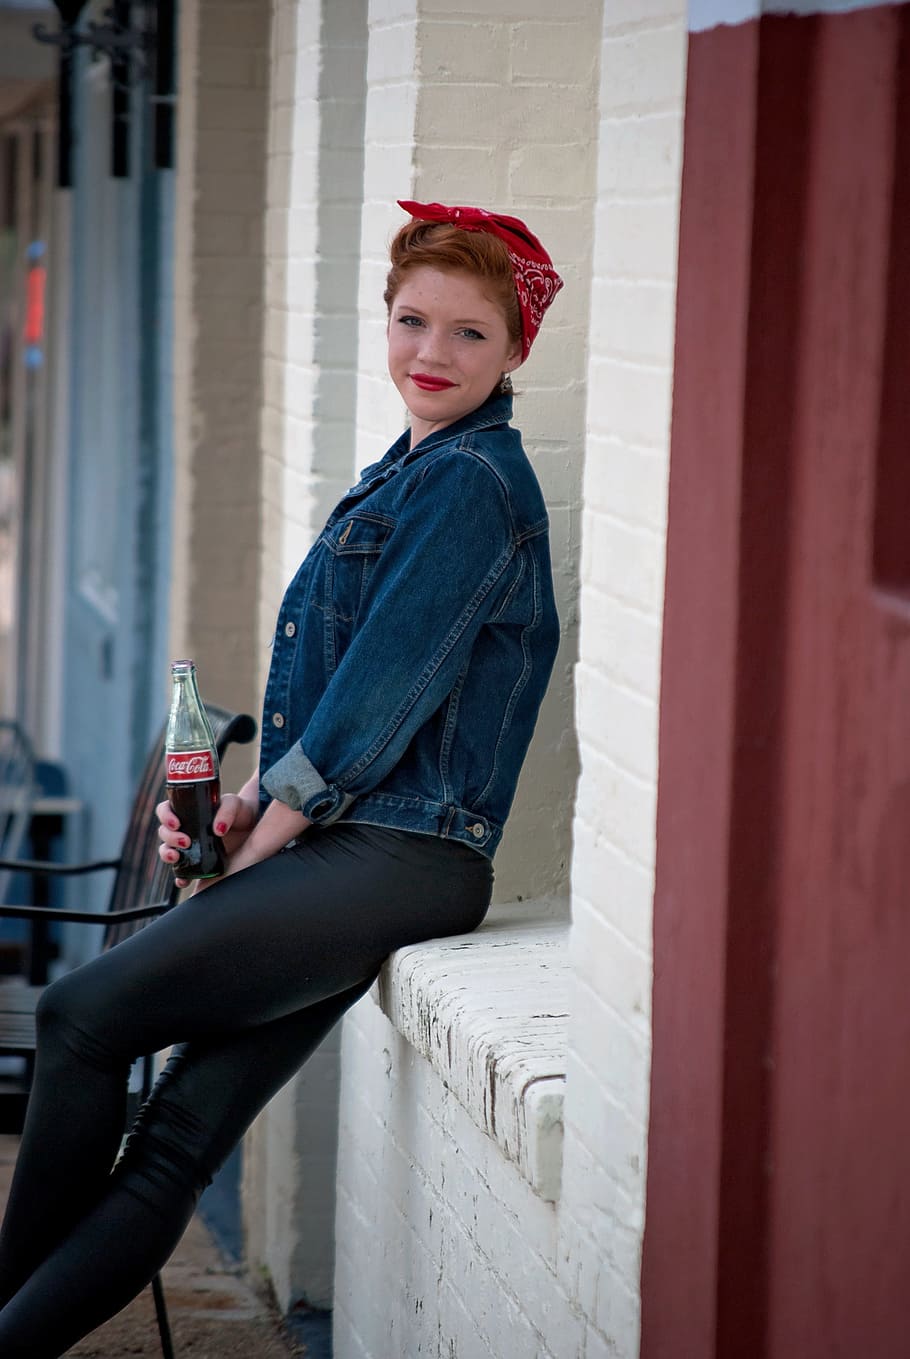 woman, sitting, holding, coca-cola bottle, girl, 50, s style, retro, fashion, young